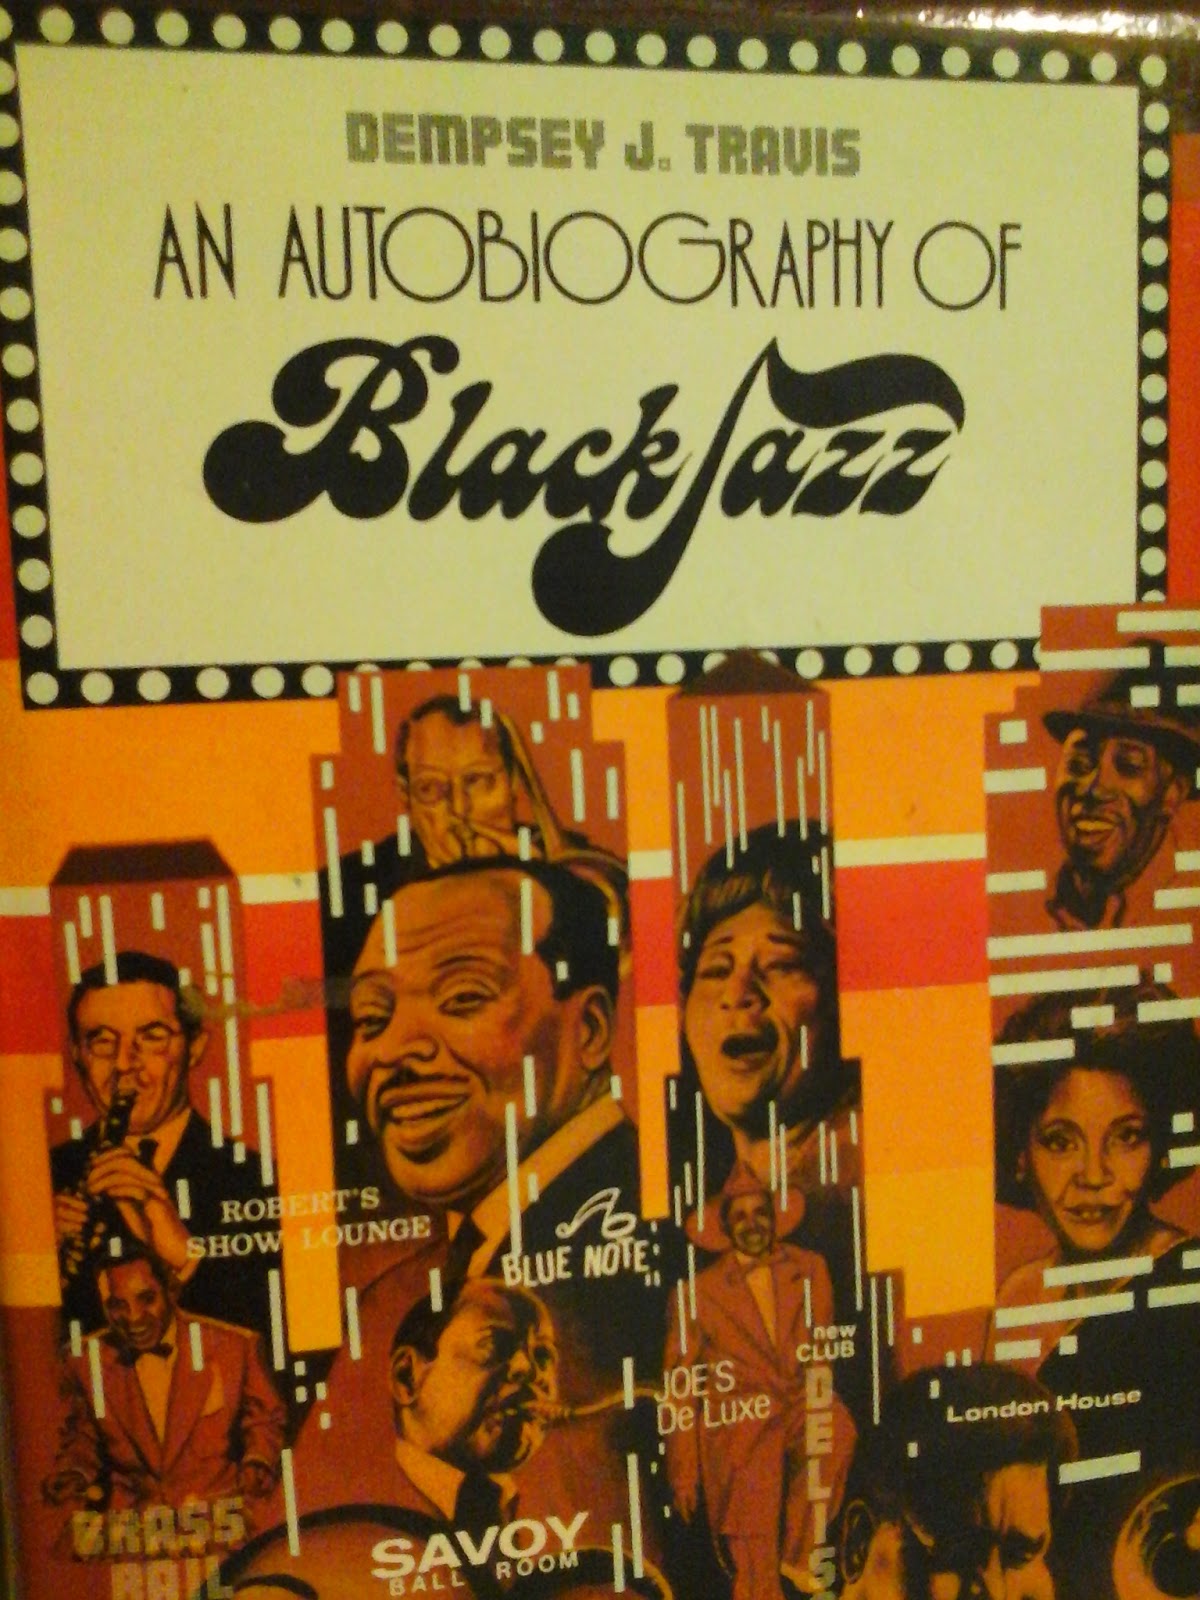 Excerpt from 'The Jazz Slave Masters' from "An Autobiography of Black Jazz" by Dempsey J. Travis